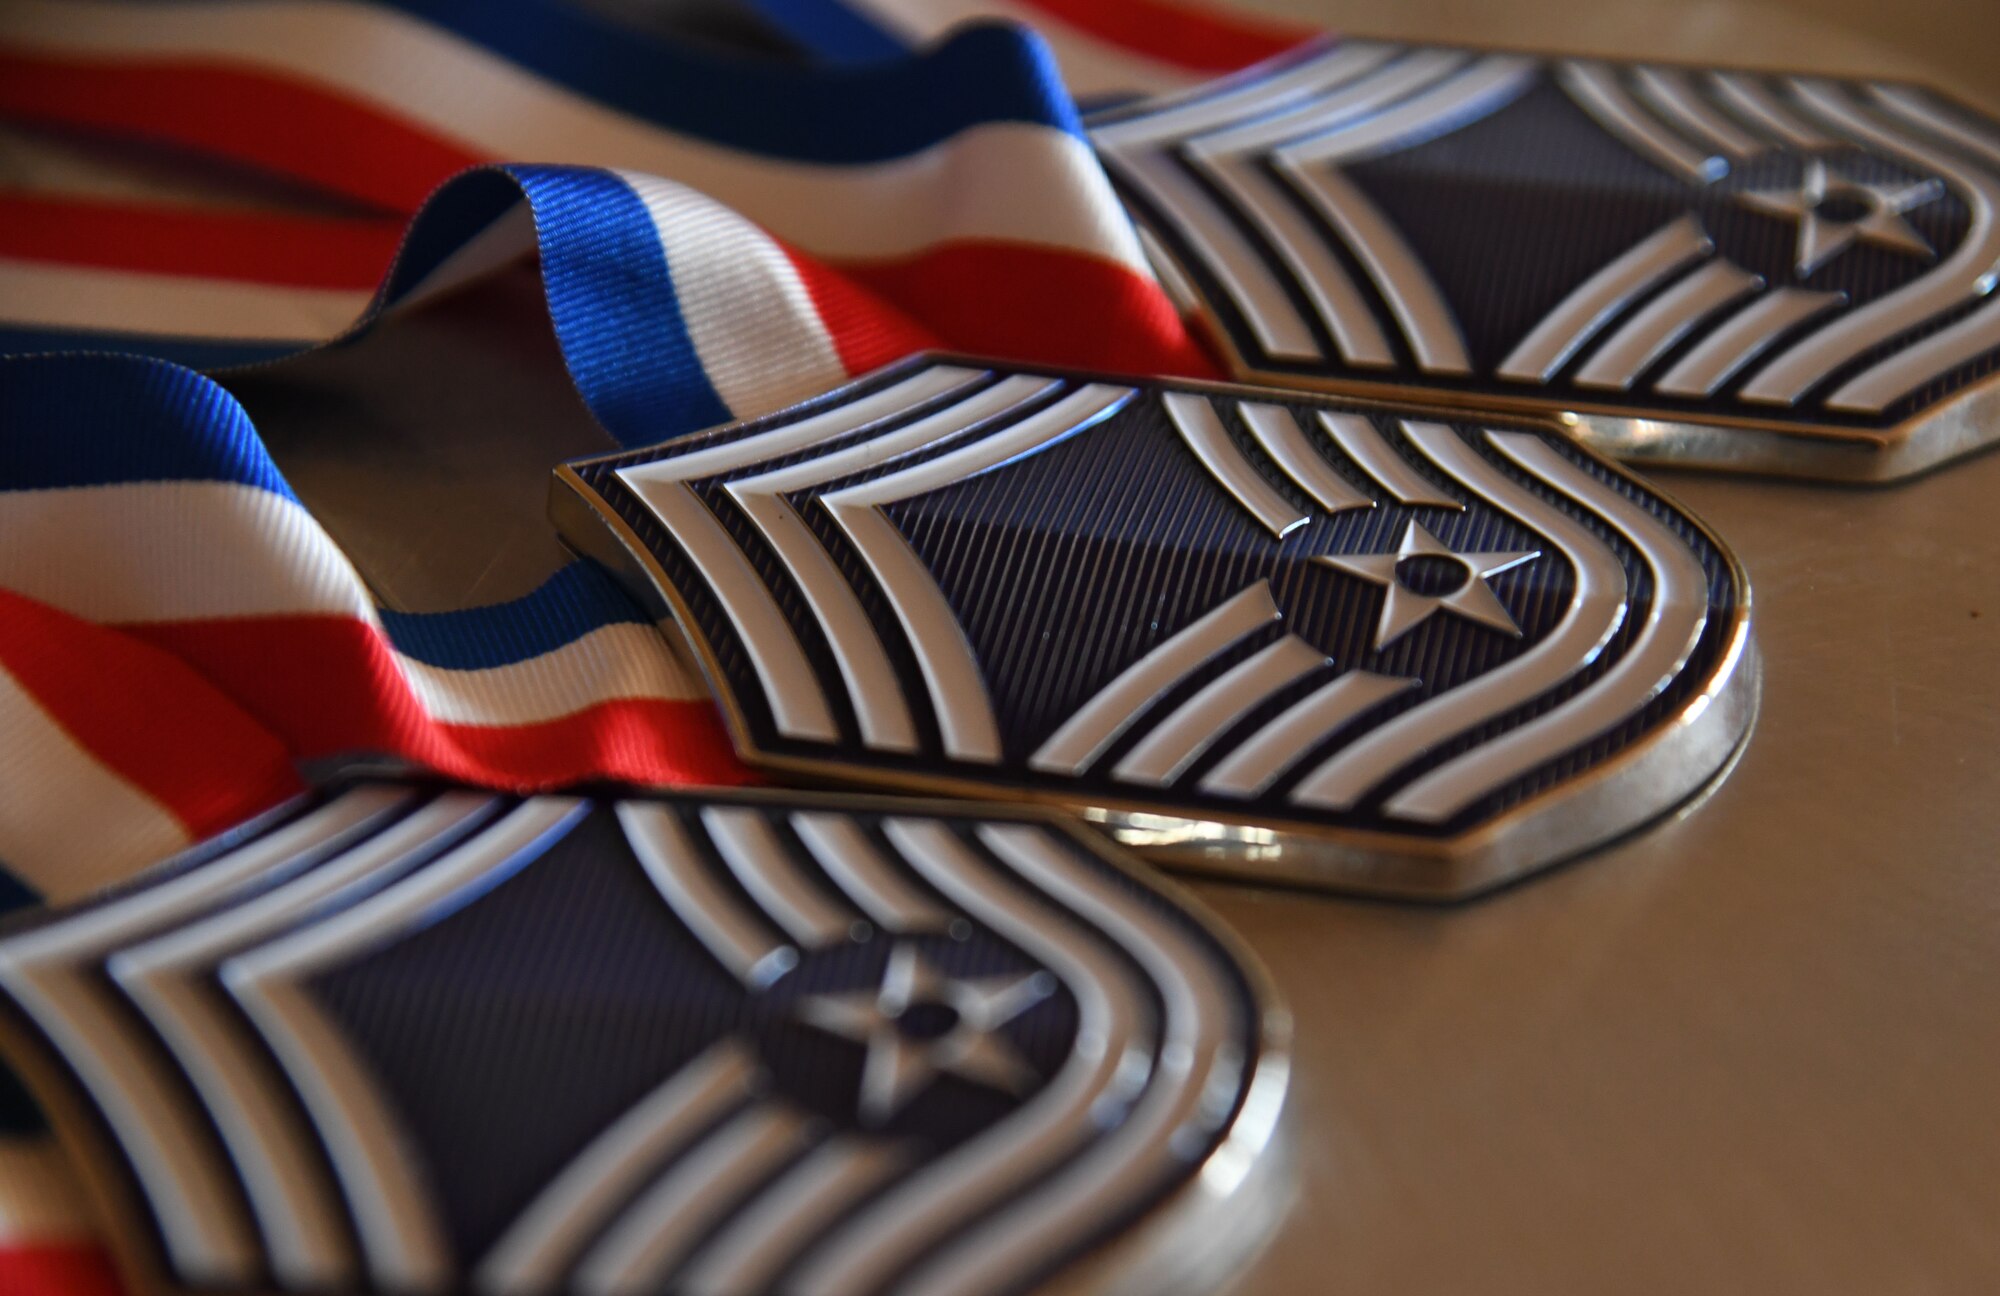 Medallions are on display during the Chief Master Sergeant Recognition Ceremony inside the Bay Breeze Event Center at Keesler Air Force Base, Mississippi, April 20, 2023.